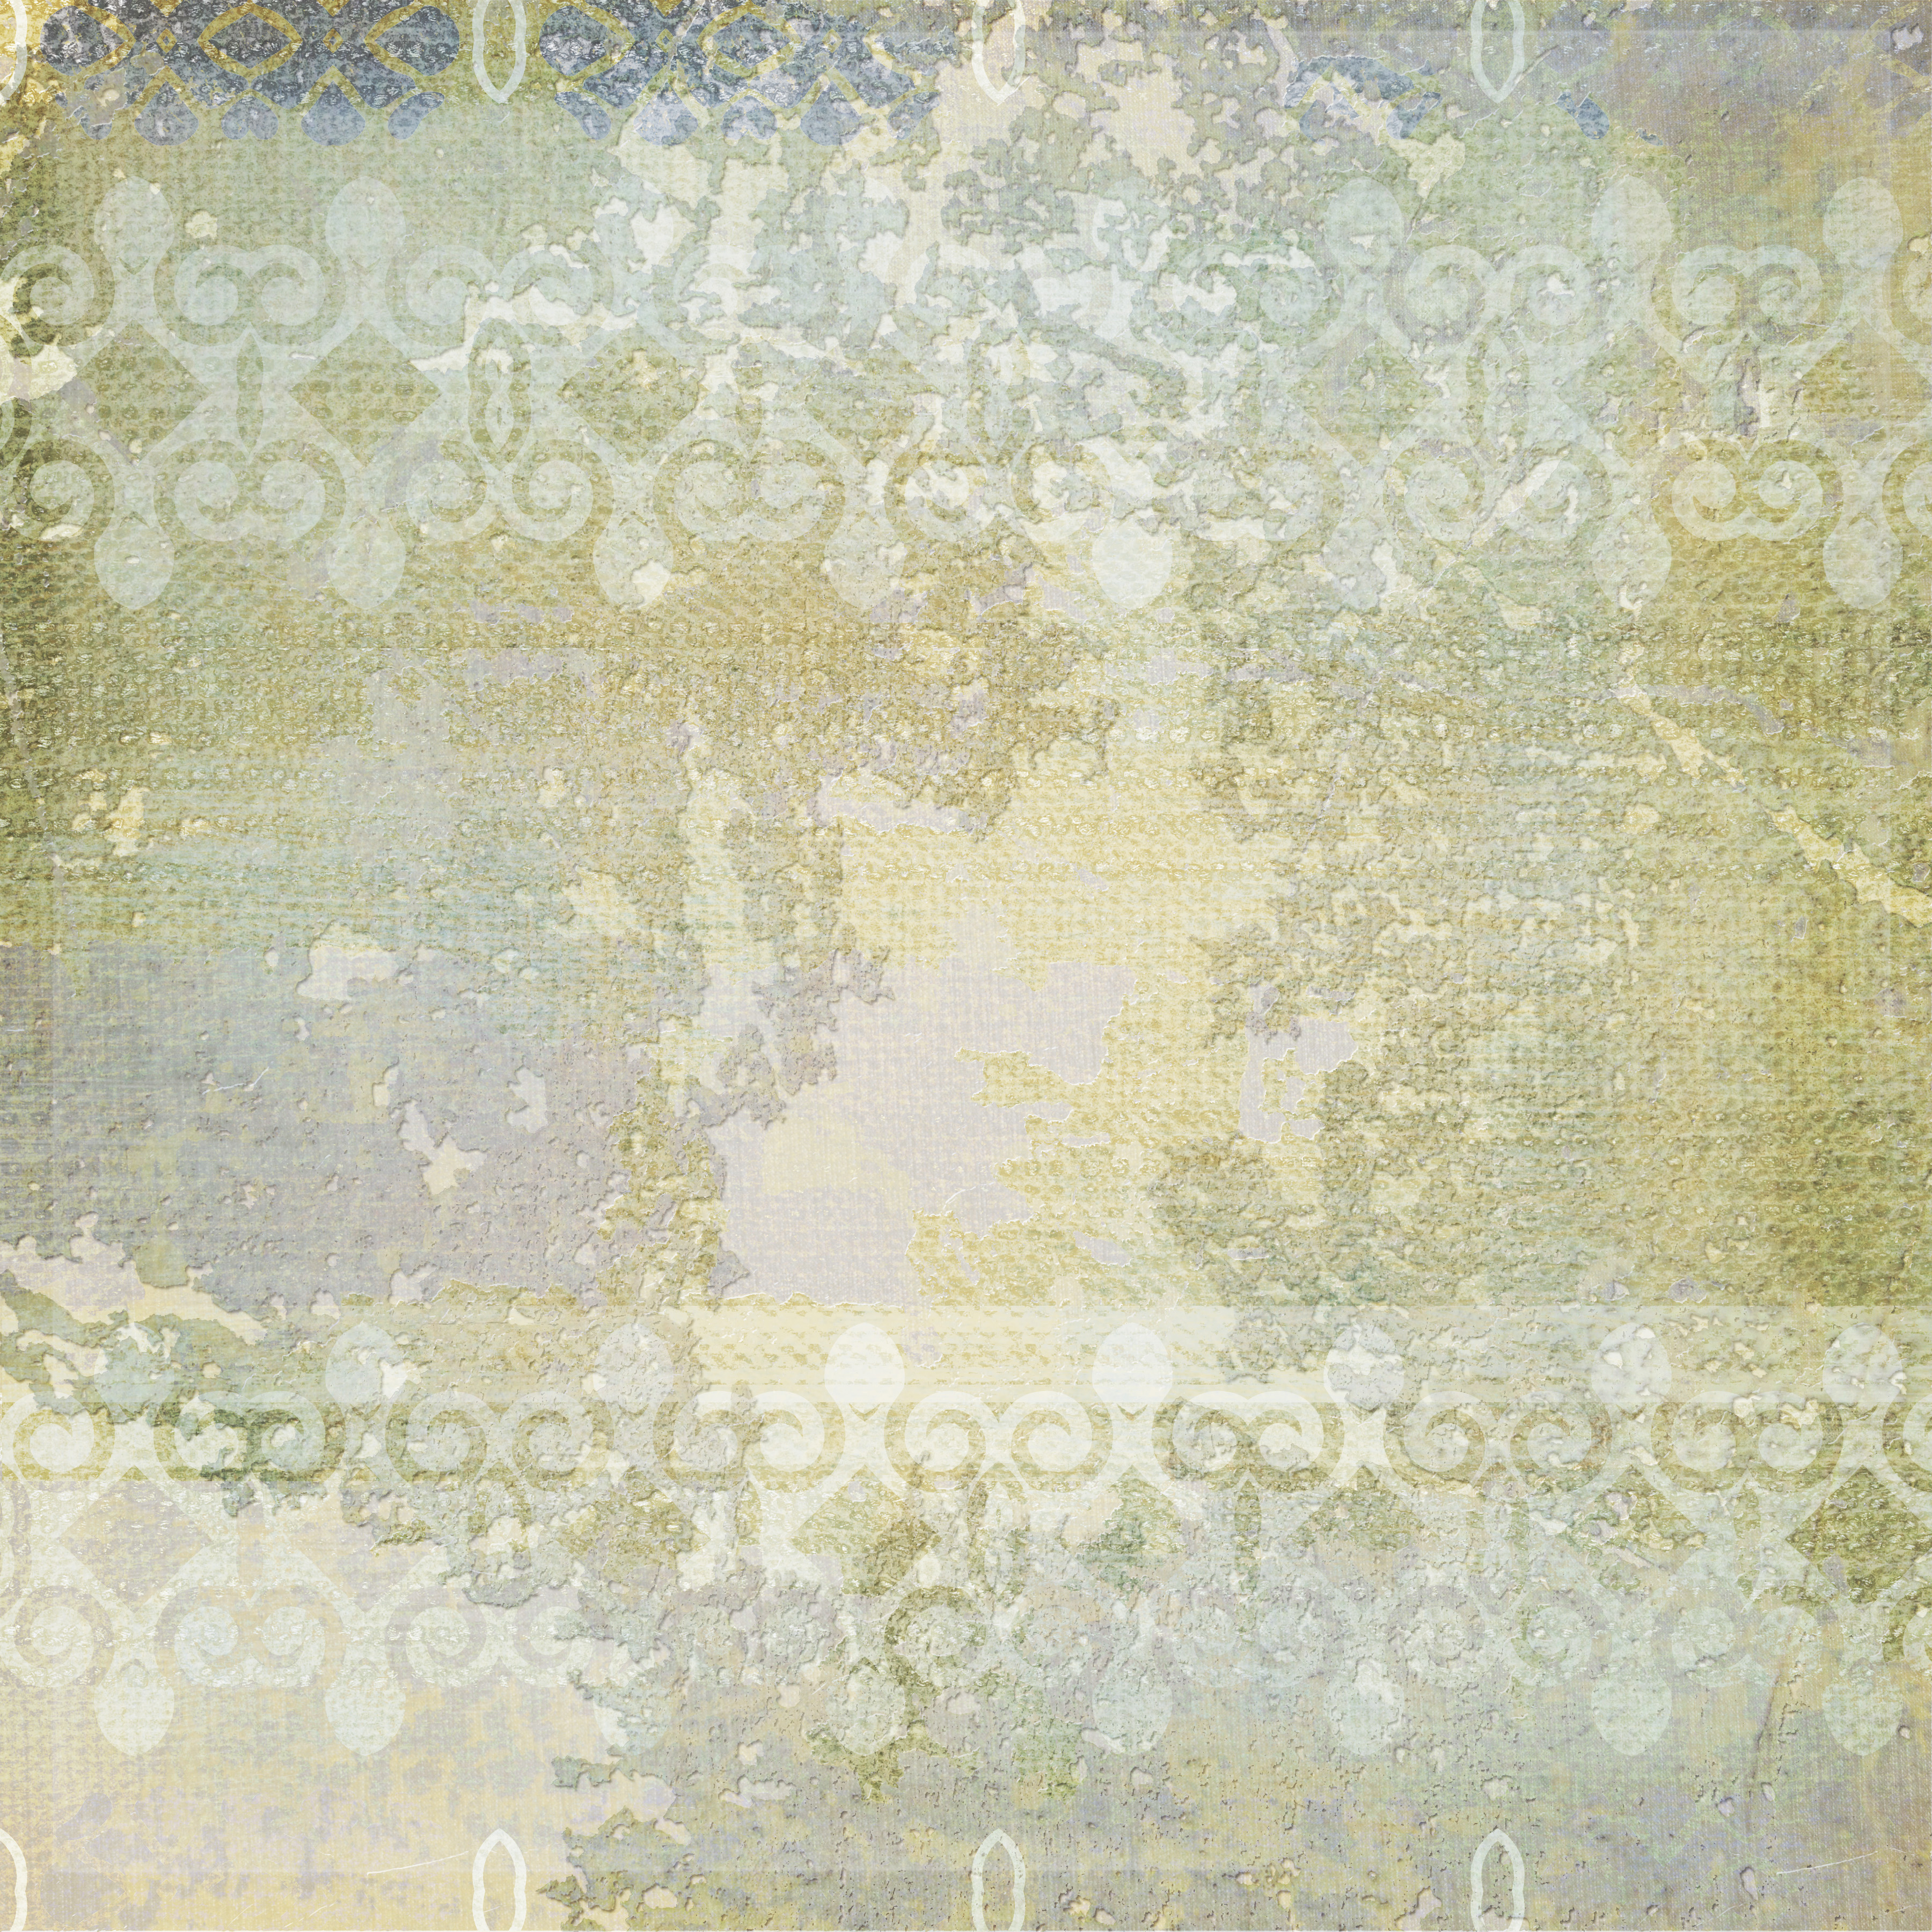 Grunge Mottled Texture, Ornate, Repetition, Repeat, Renaissance, HQ Photo